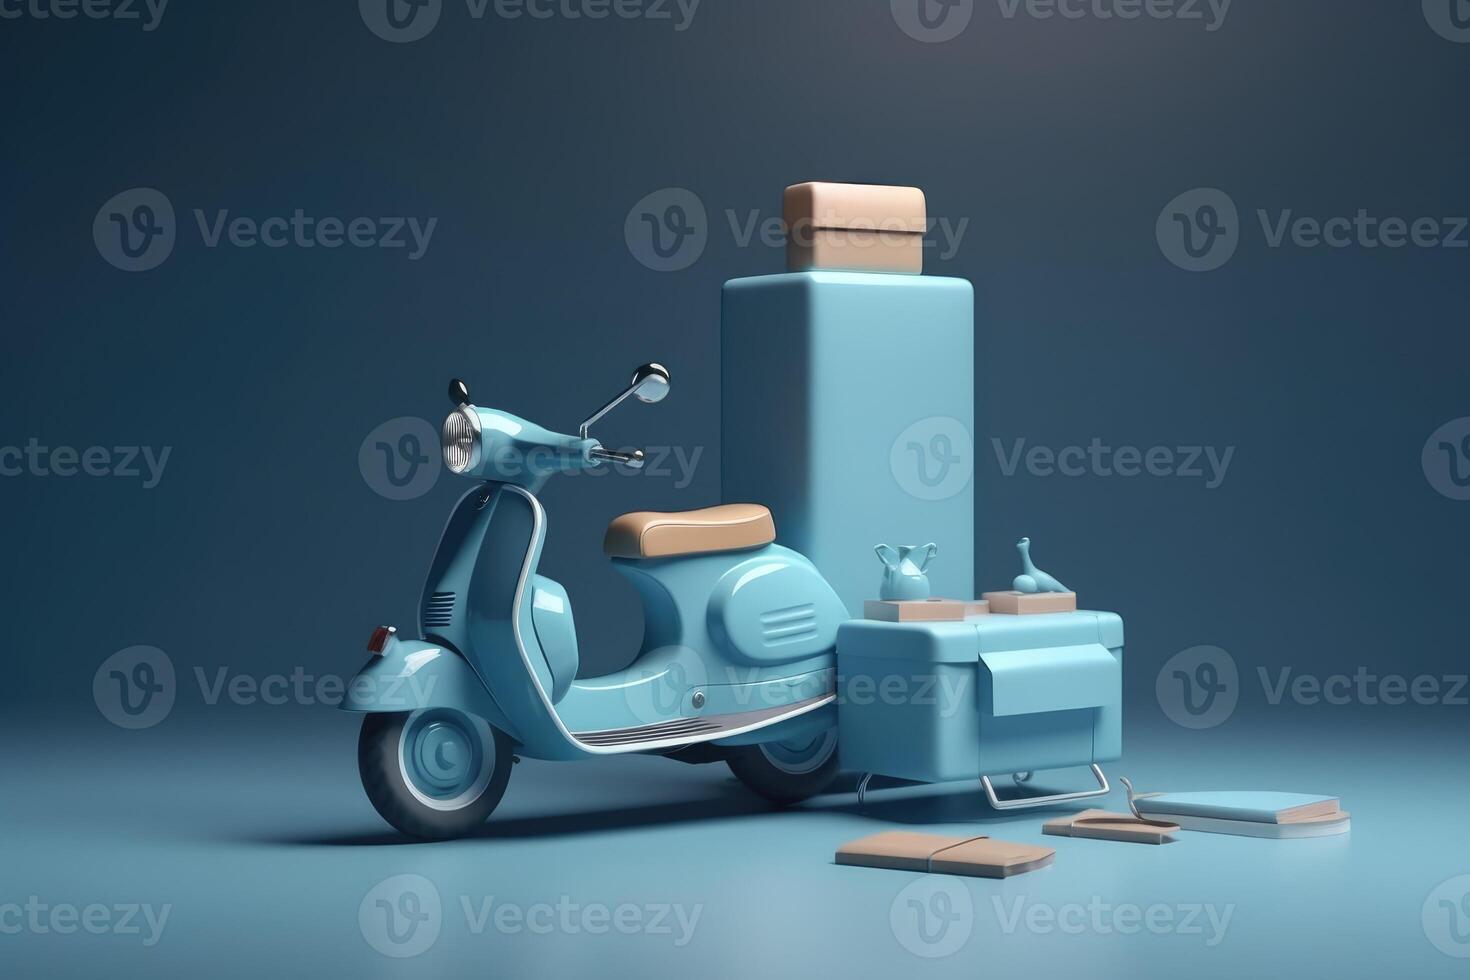 E-commerce concept, Delivery service in mobile app, Transportation or delivery by scooter, 3d render. photo